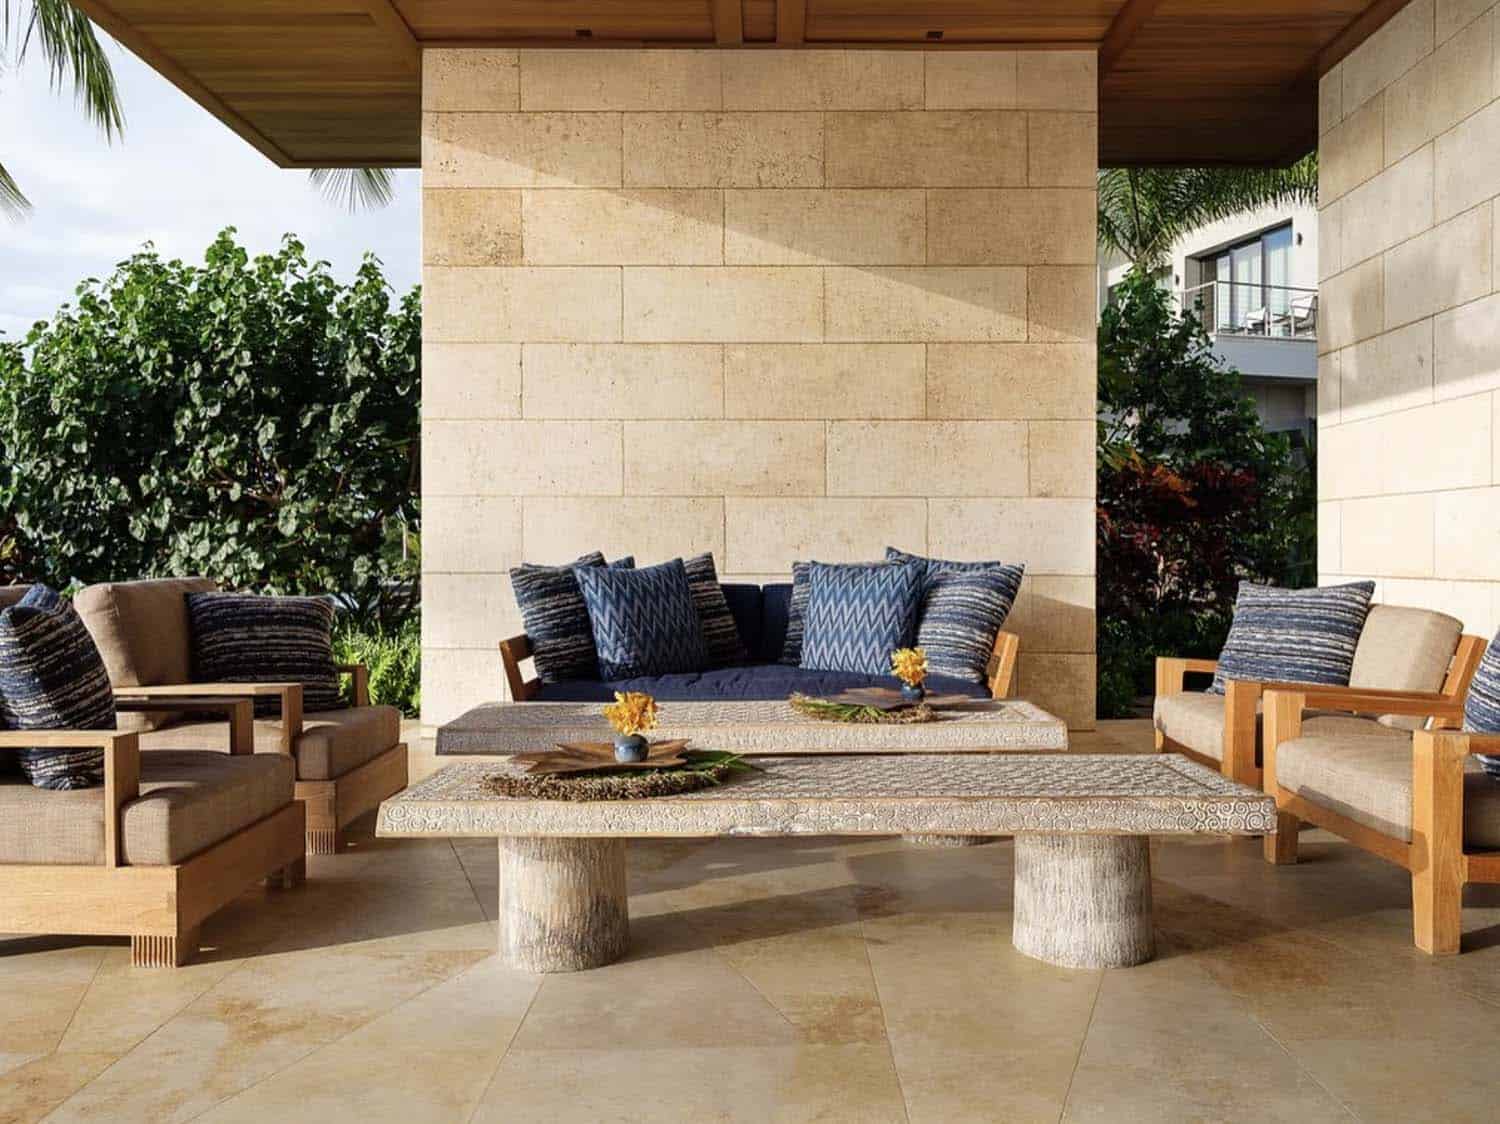 contemporary beach house exterior patio with outdoor furniture